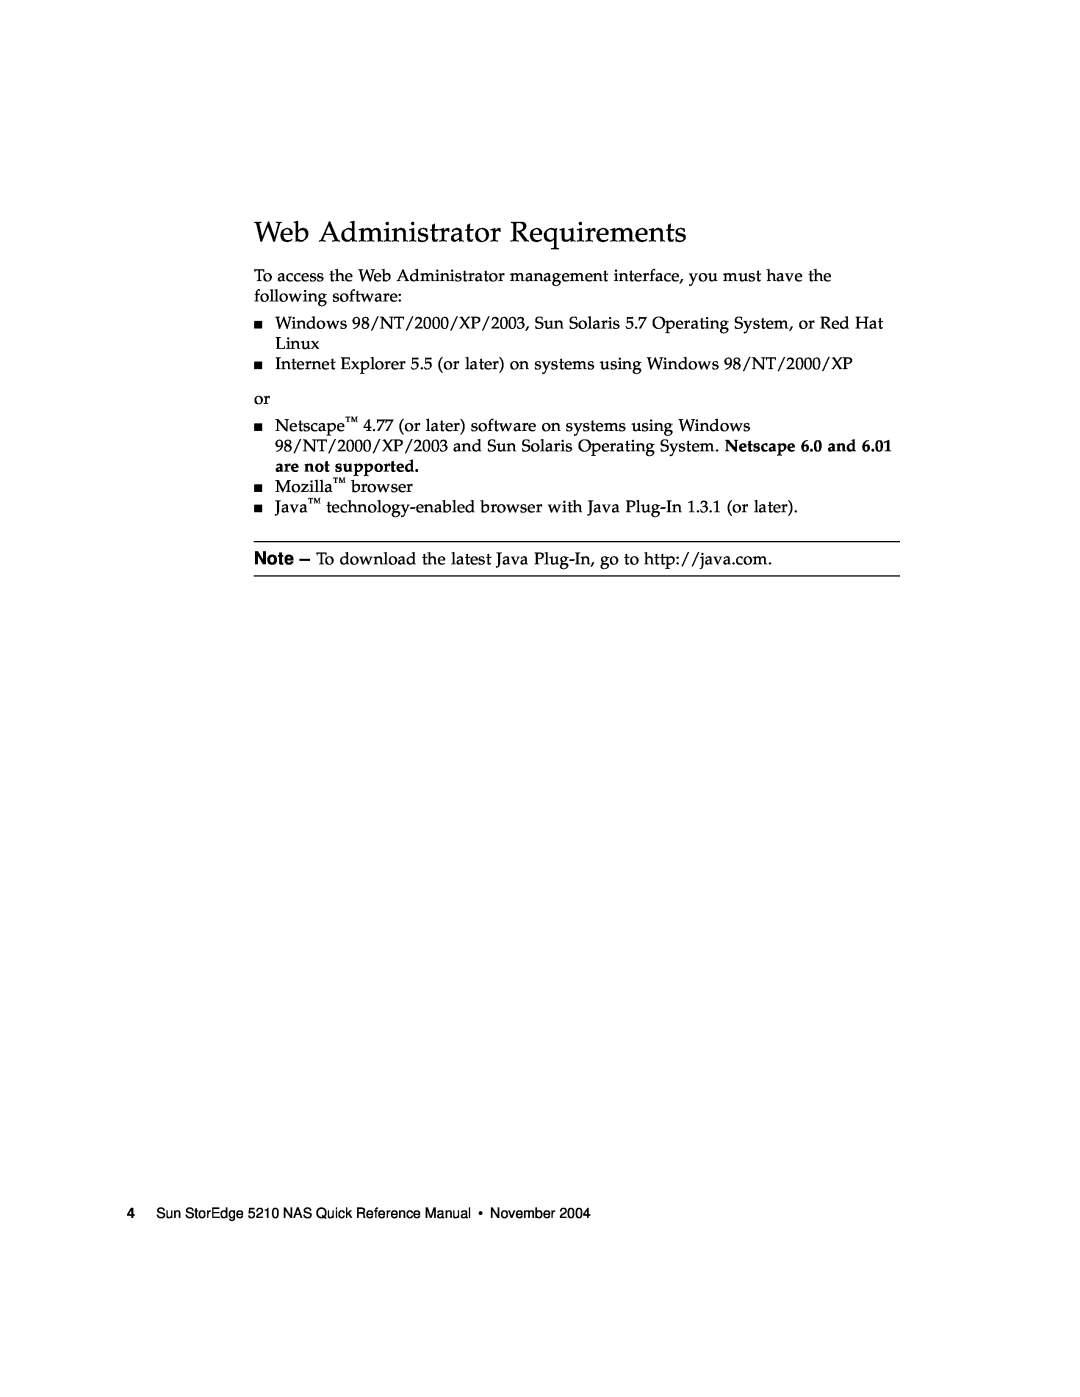 Sun Microsystems 5210 NAS manual Web Administrator Requirements 